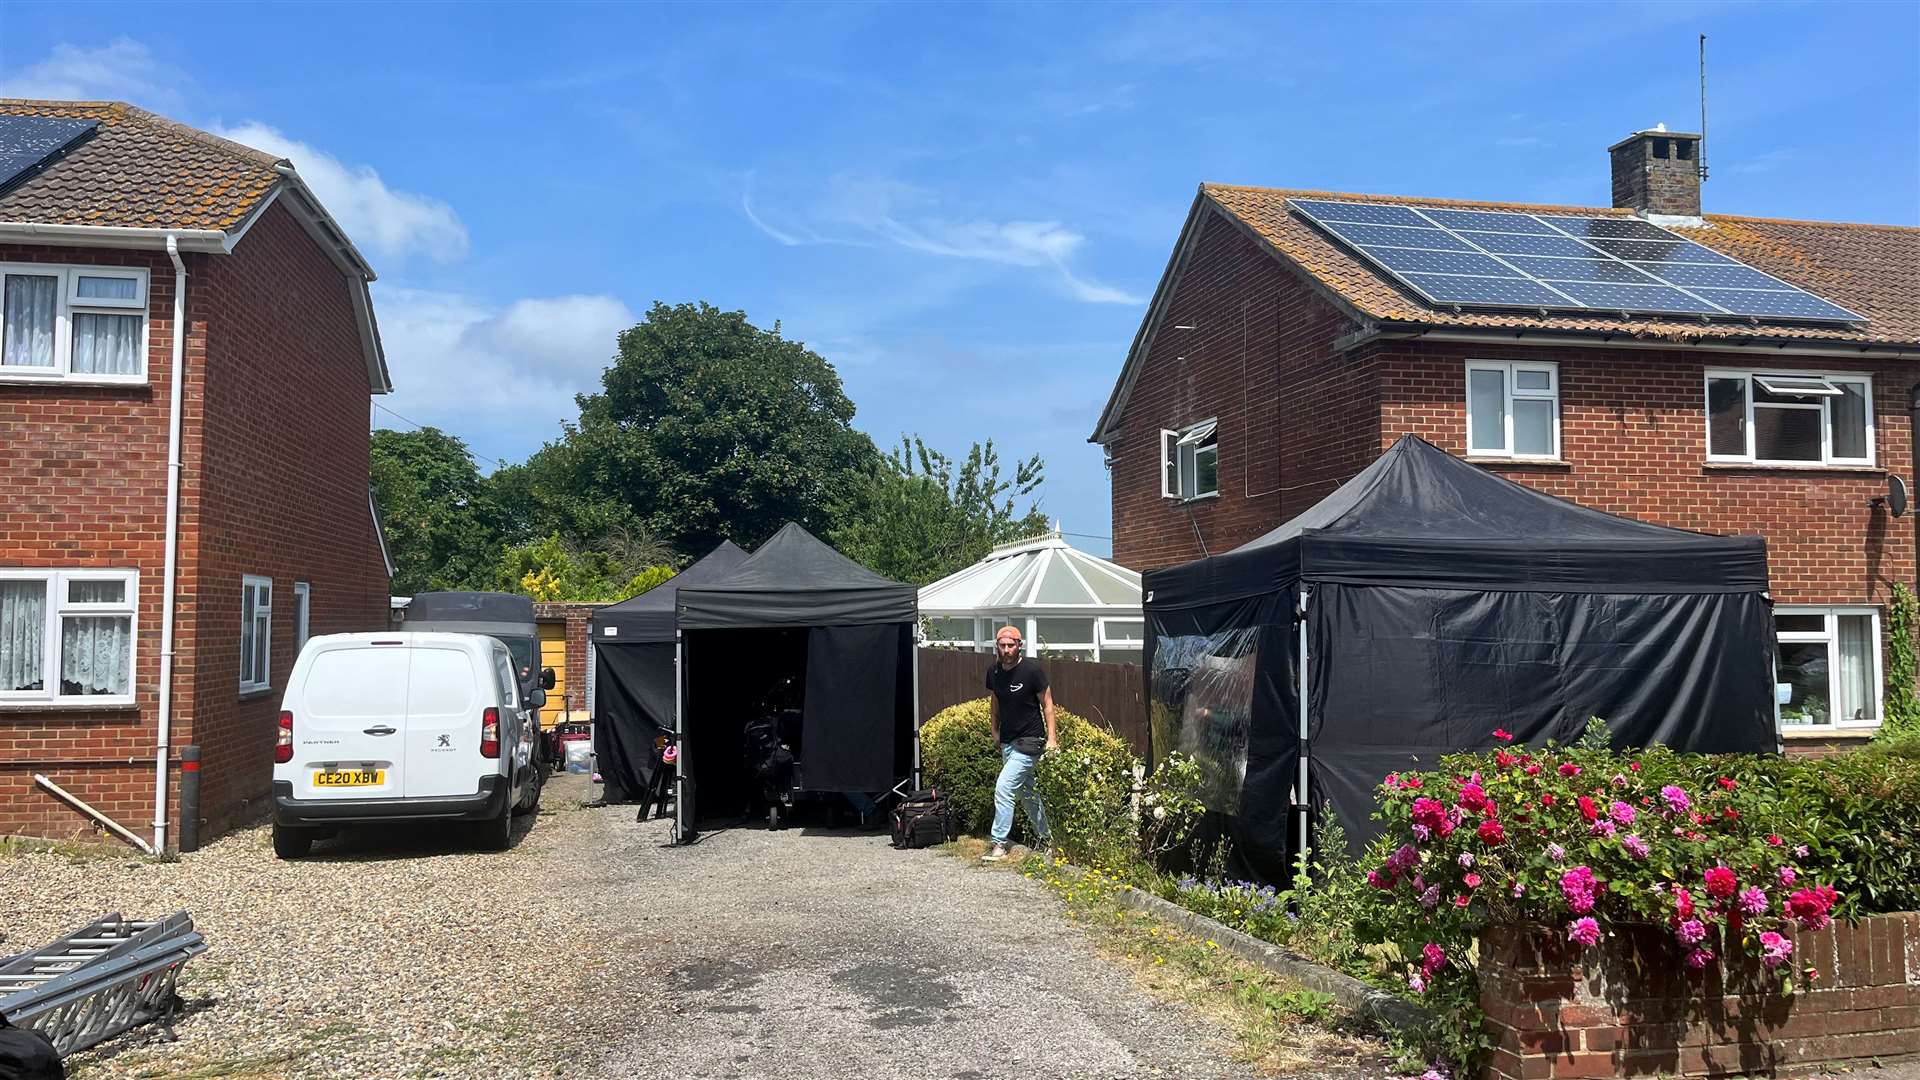 Film crews in Church Road in Cheriton, earlier this year filming for The Serial Killer’s Wife